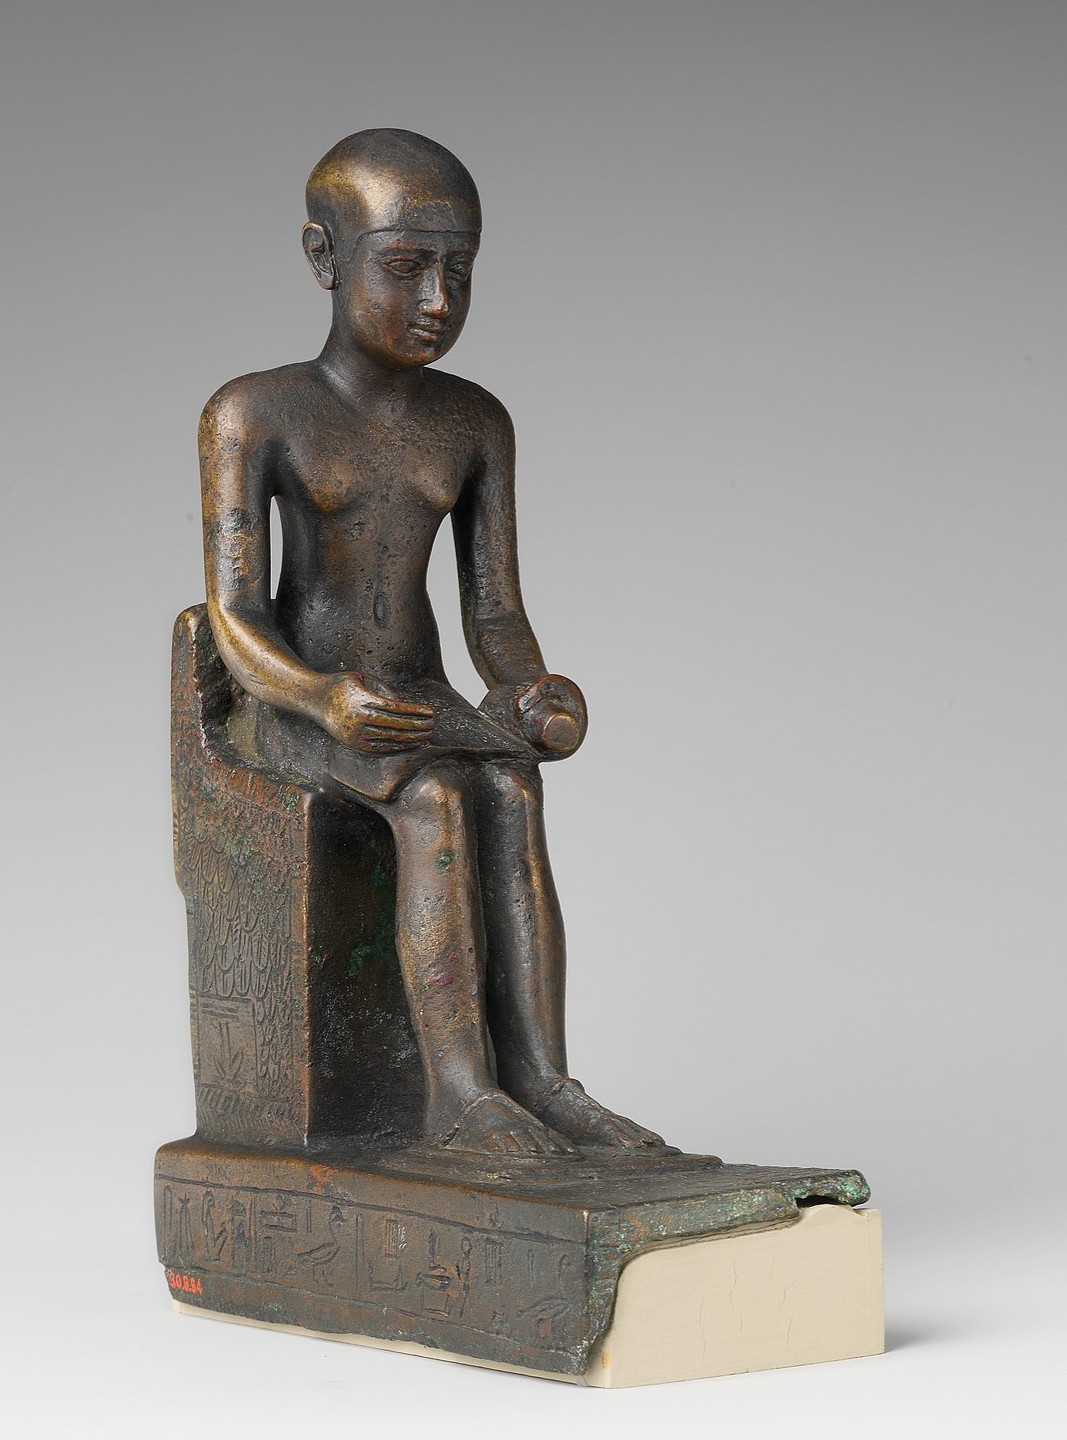 Imhotep Statuette